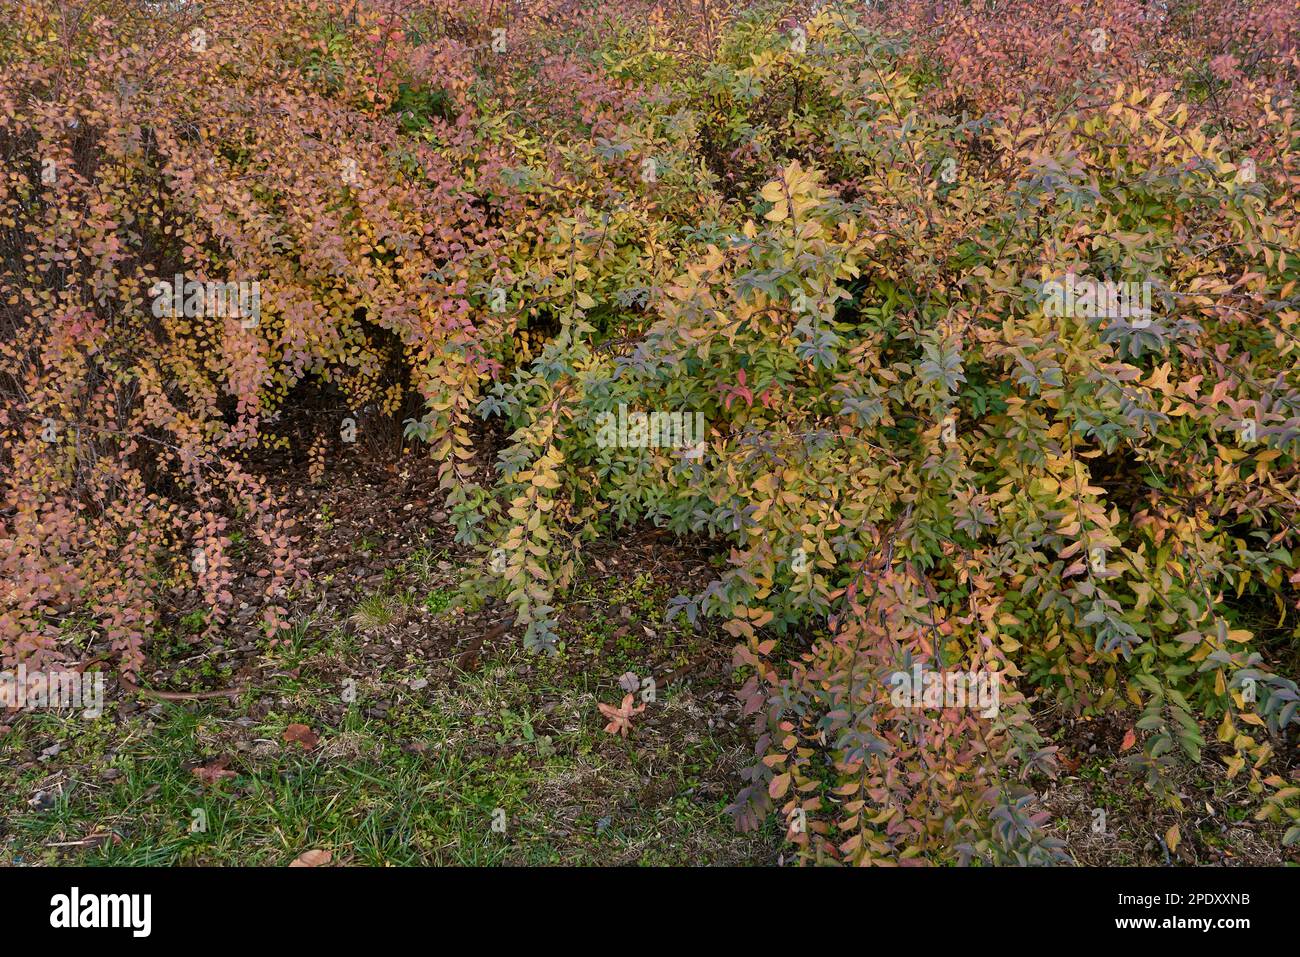 Spiraea cantoniensis colorful leaves Stock Photo